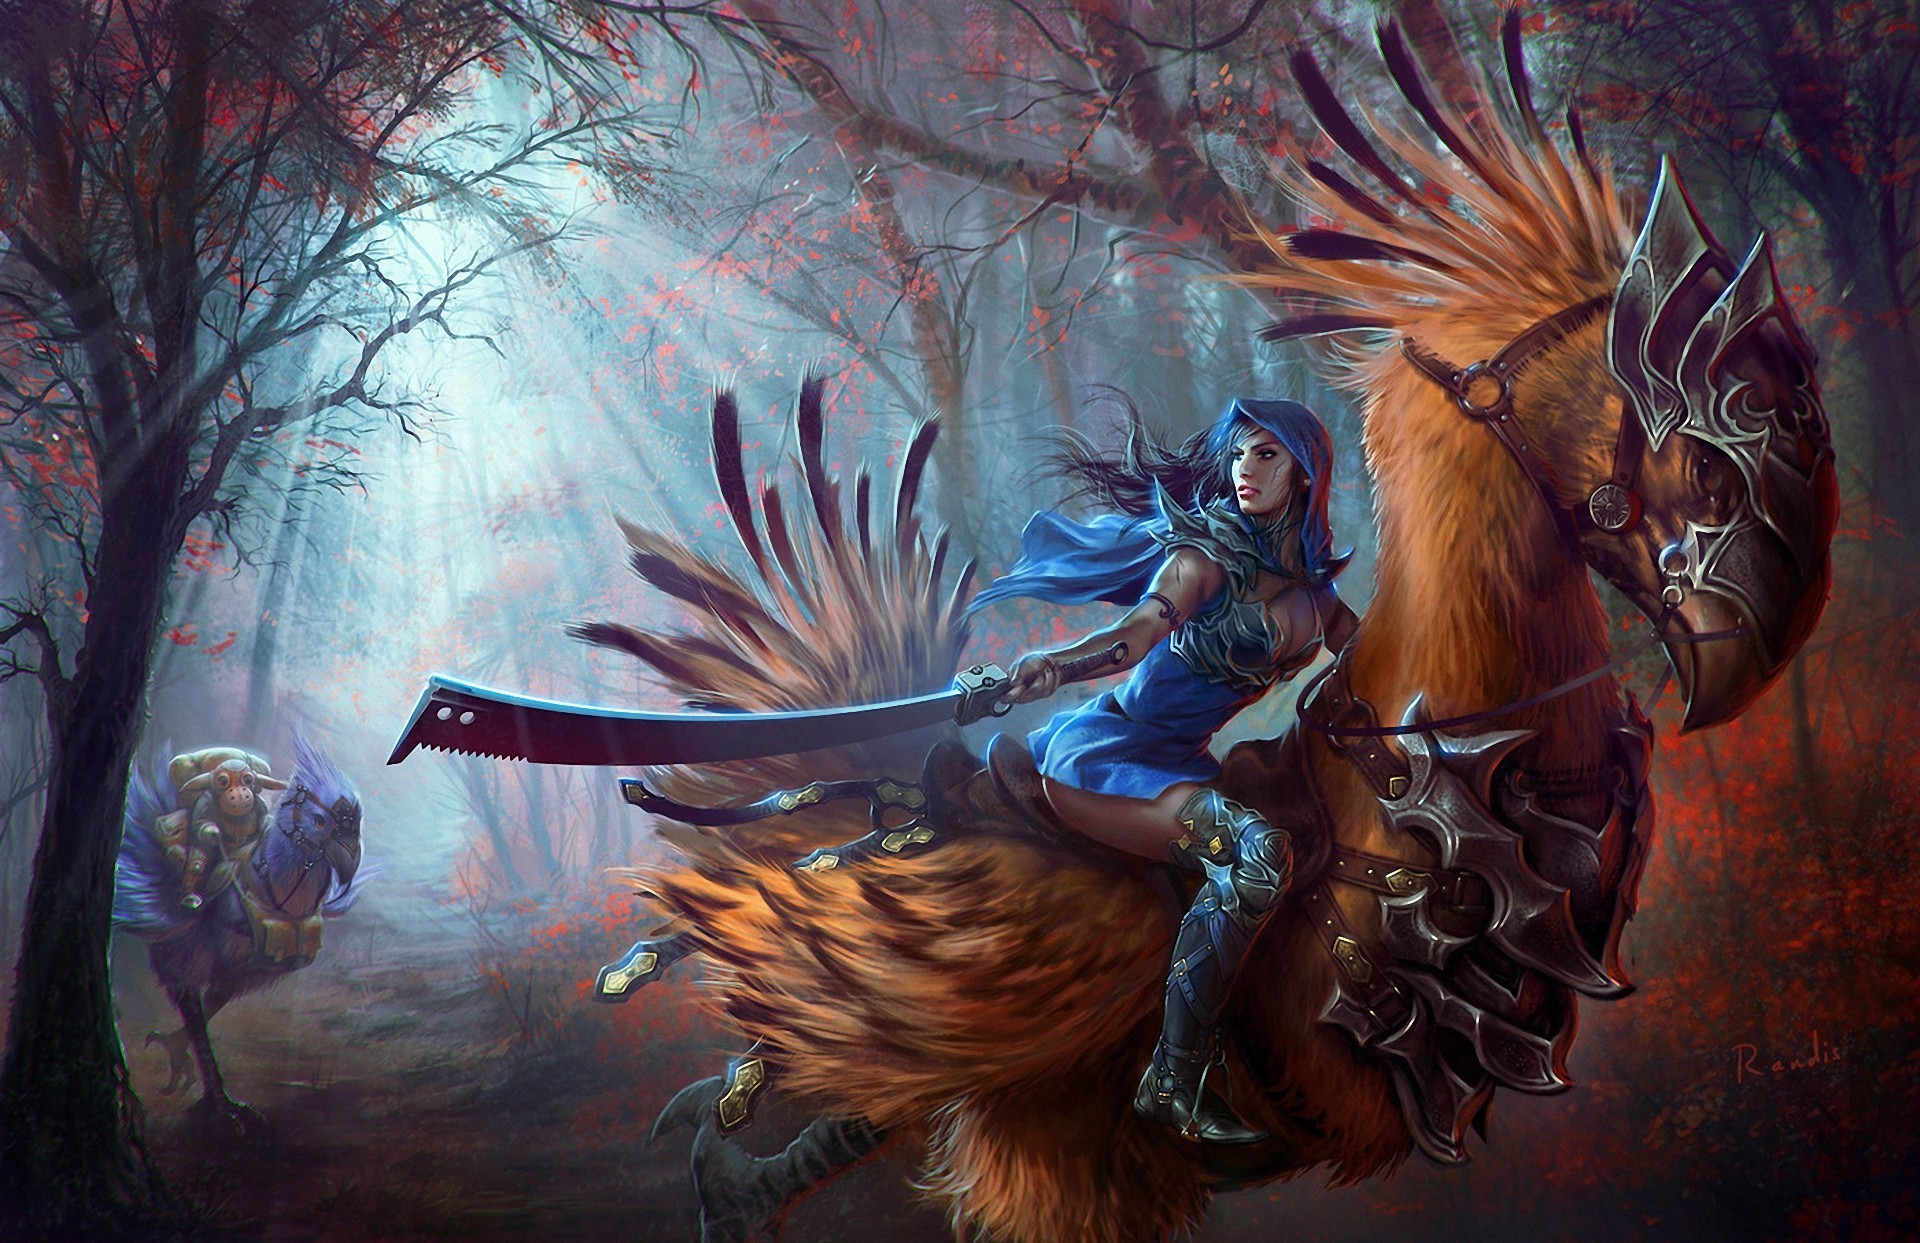 games, Video games, Fantasy, Forest, Trees, Action, Adventure, Creatures, Monsters, Weapons, Sword, Women, Girls Wallpaper